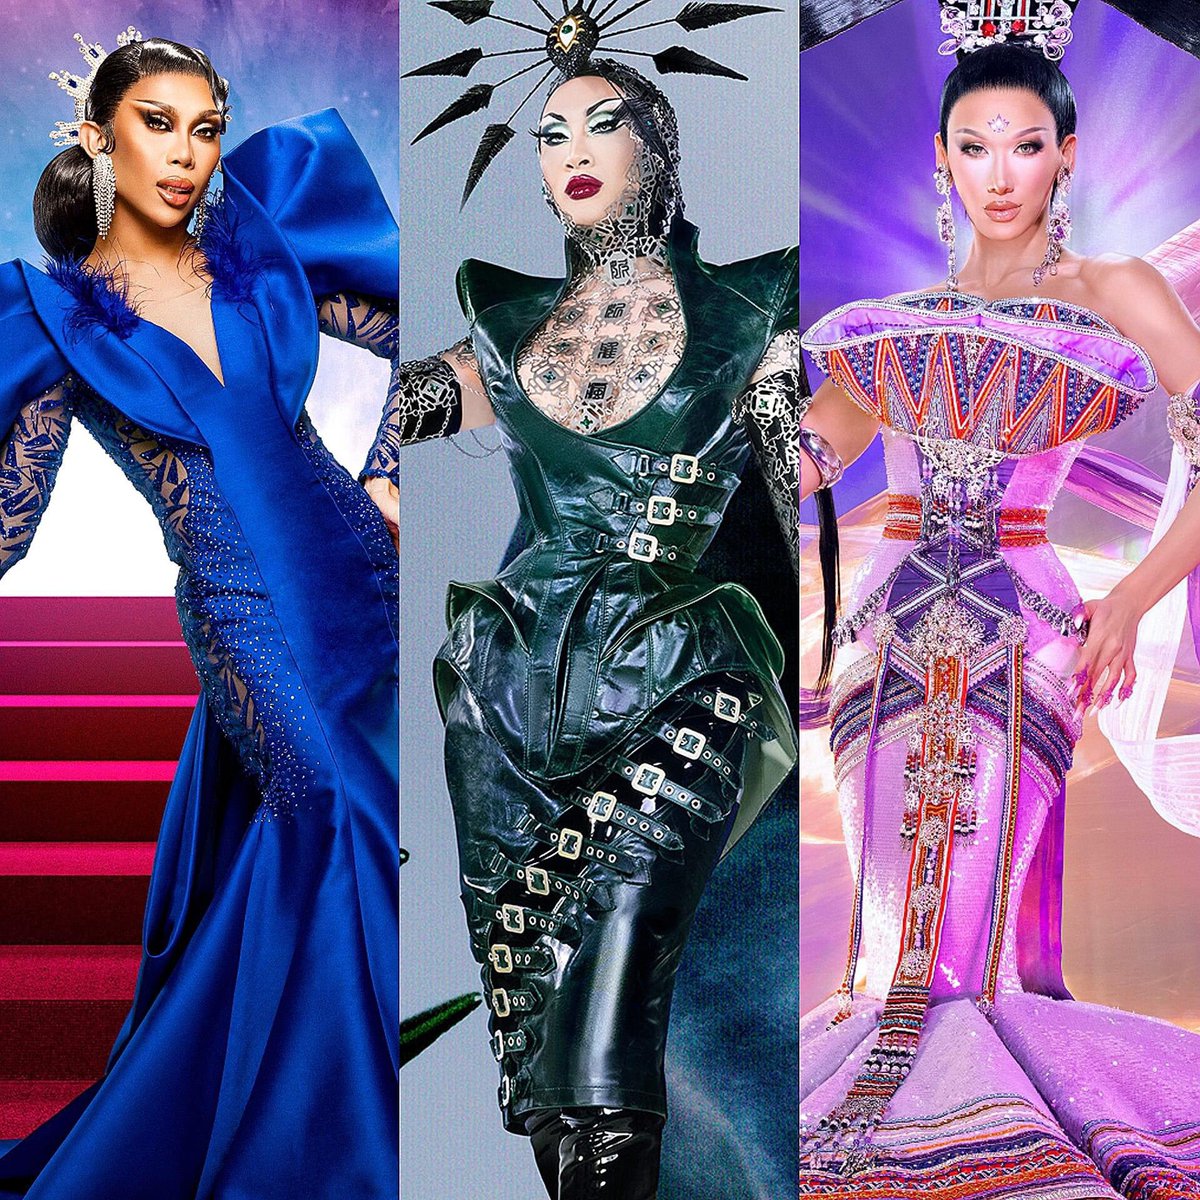 ASIAN EXCELLENCE BACK TO BACK #dragrace